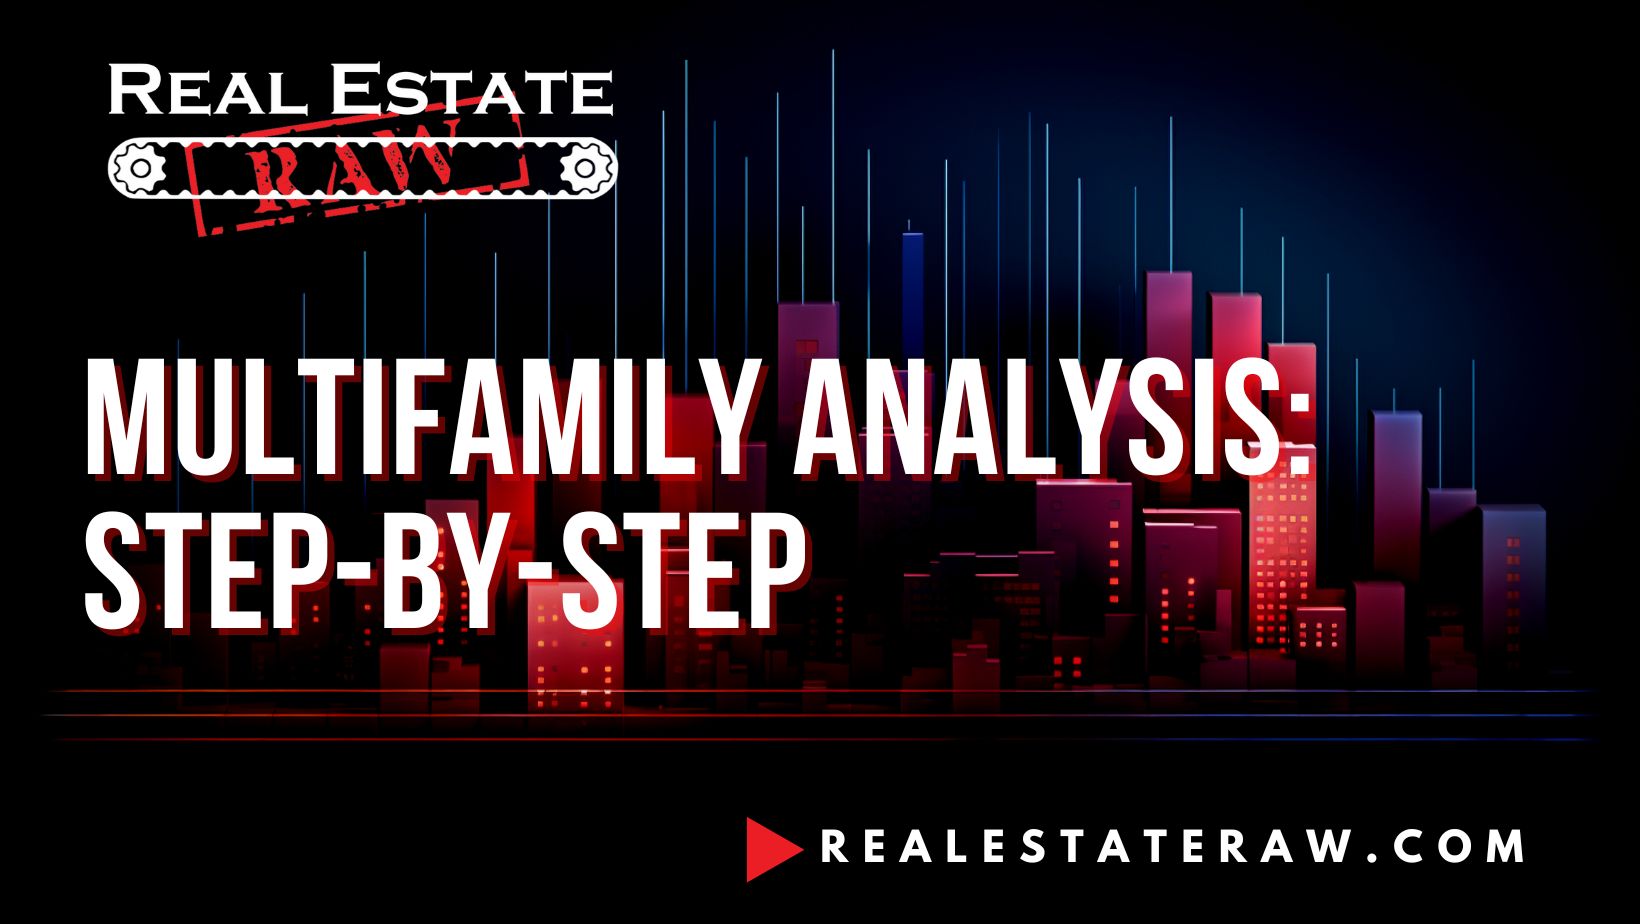 Multifamily Analysis: Step-by-Step